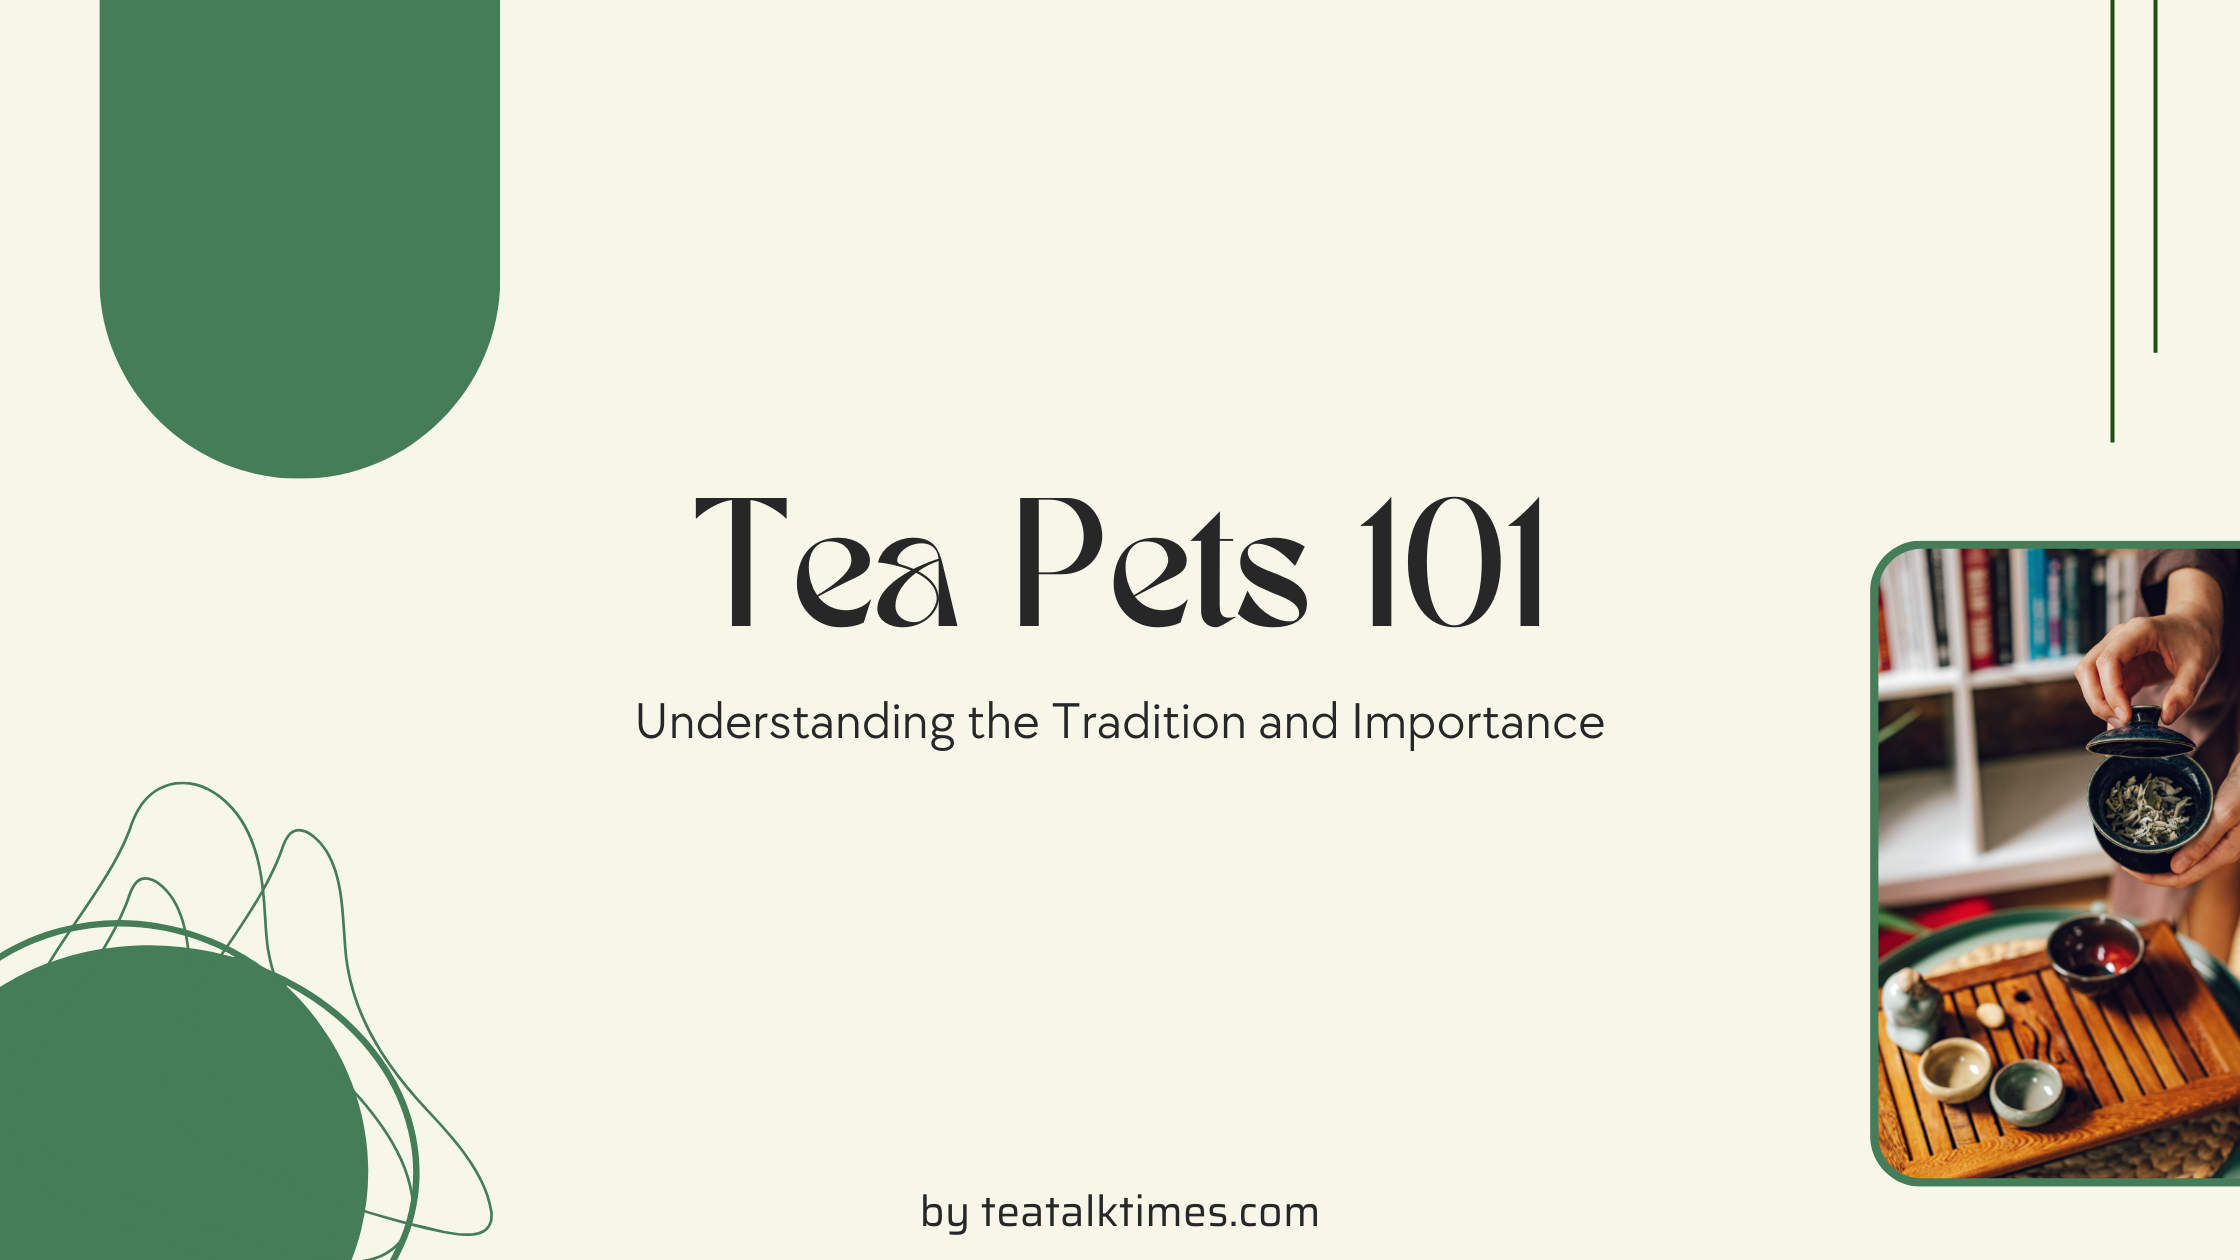 Tea Pets 101: Understanding the Tradition and Importance